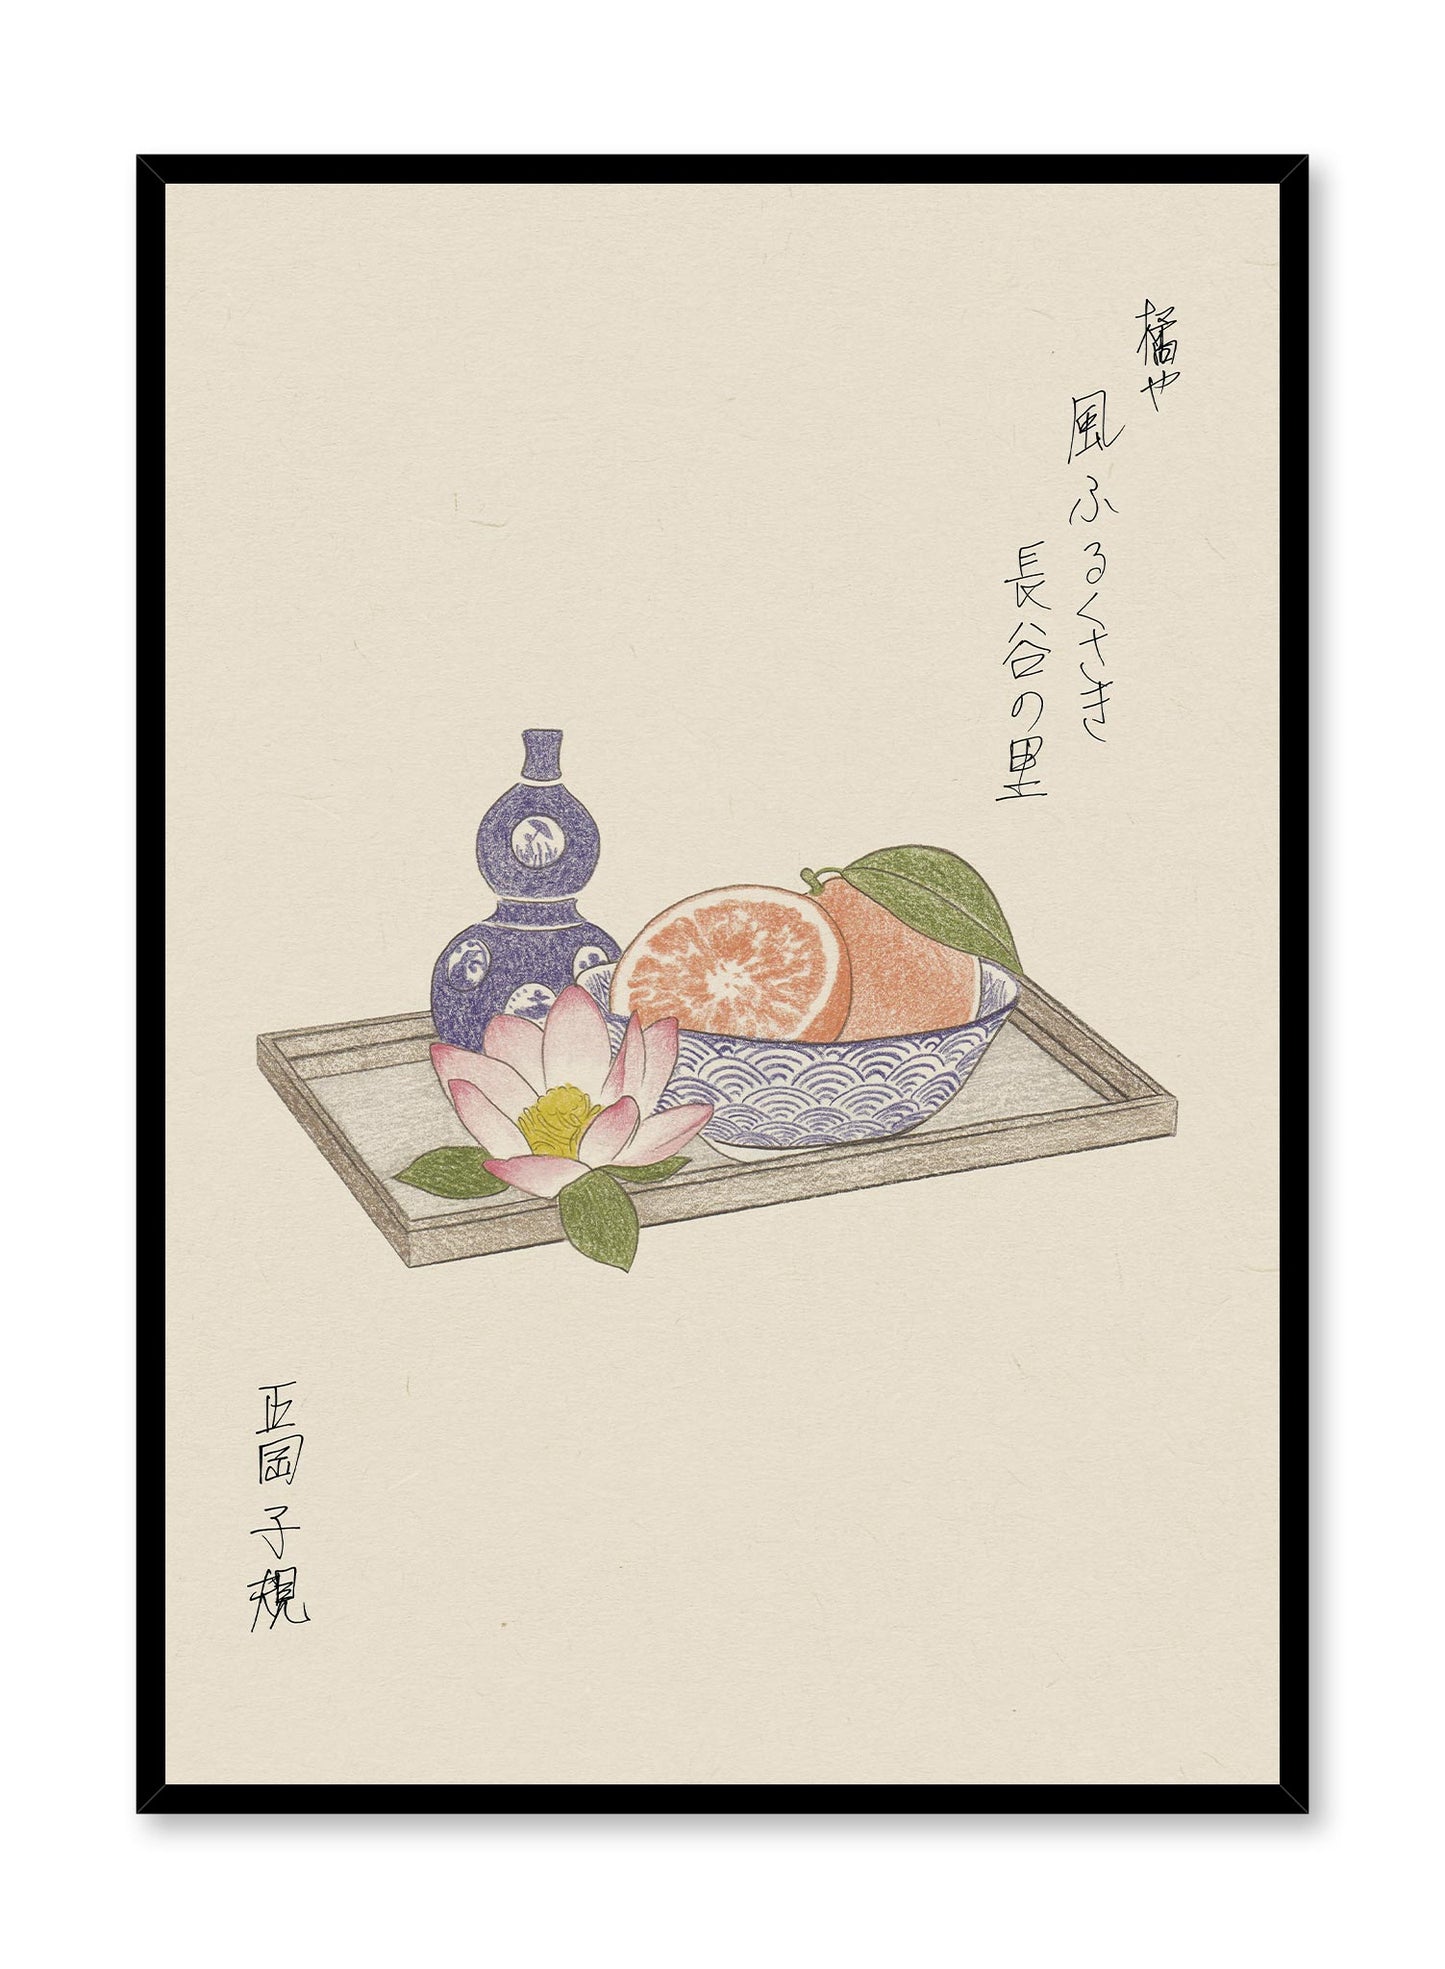 Tachibana is a minimalist illustration by Opposite Wall of a tray with a grapefruit in a bowl, a bottle and a lotus flower. 